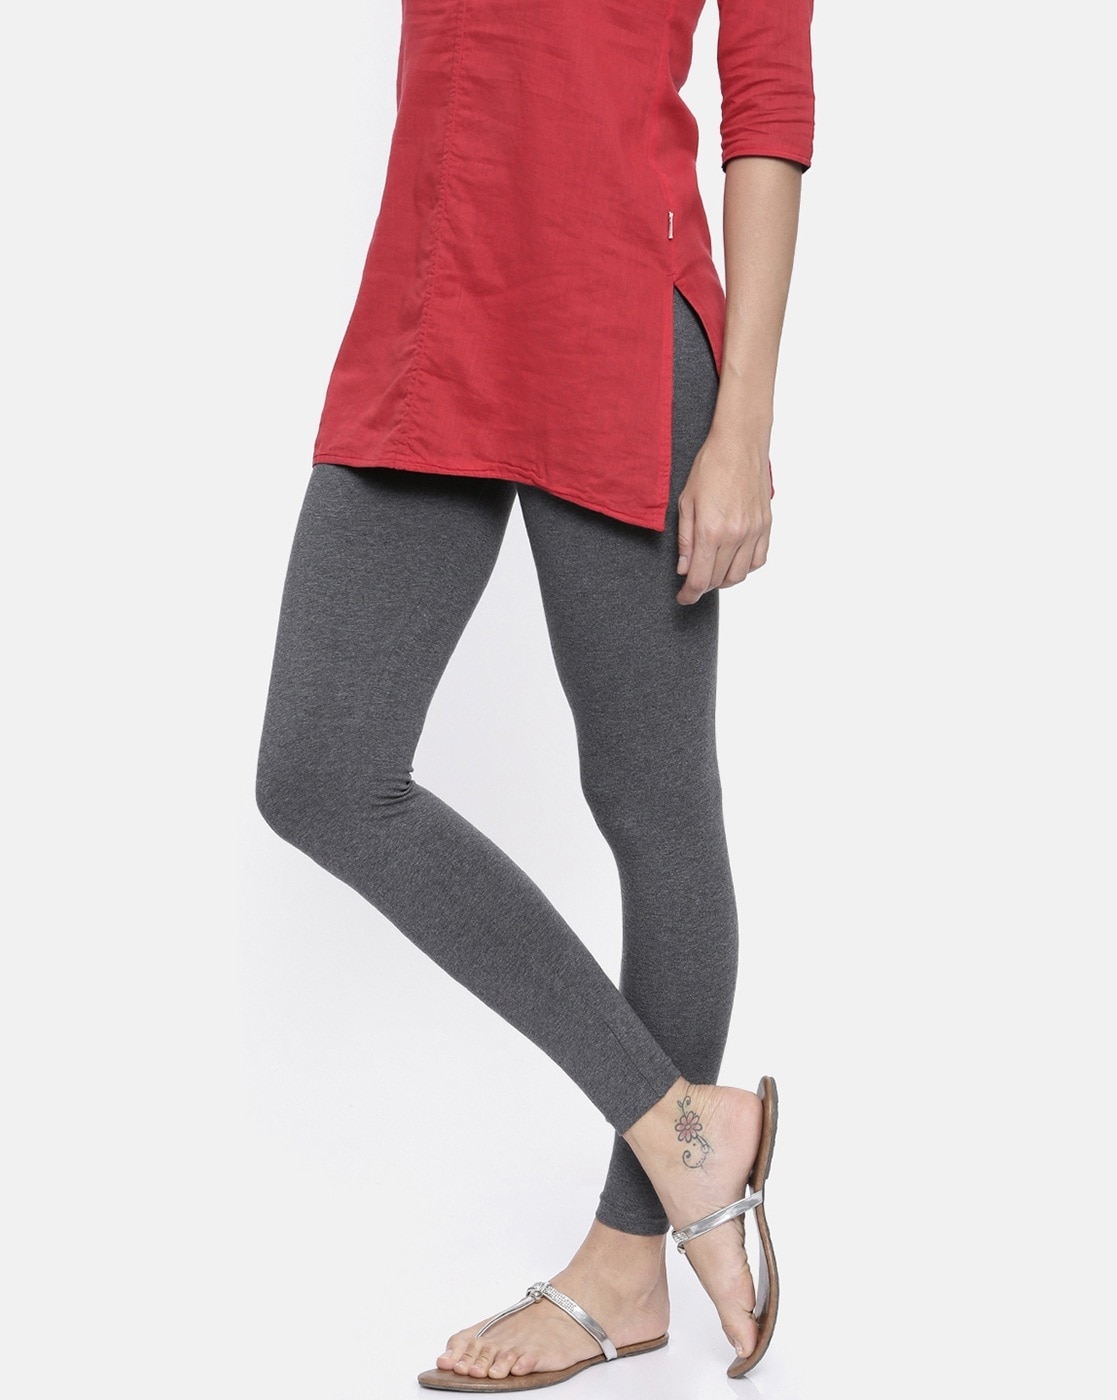 What Color Shirt Do You Wear With Grey Leggings? – solowomen